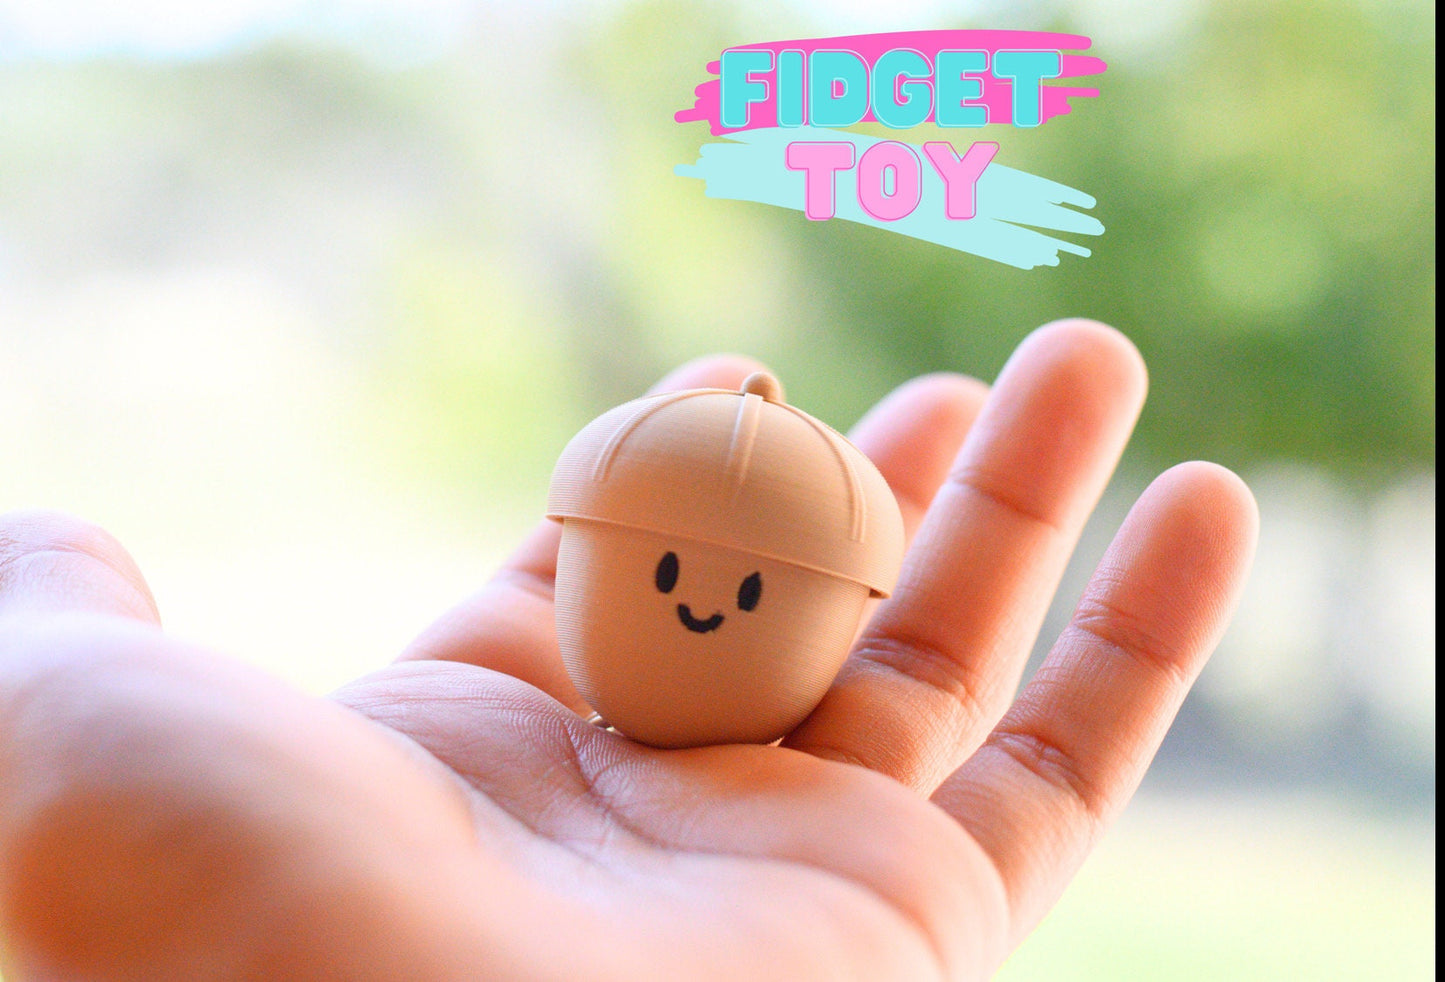 Adorable Acorn Fidget Friend - Tactile Clicky Switch | Sensory Stim for Stress & ADHD | ASMR Toy